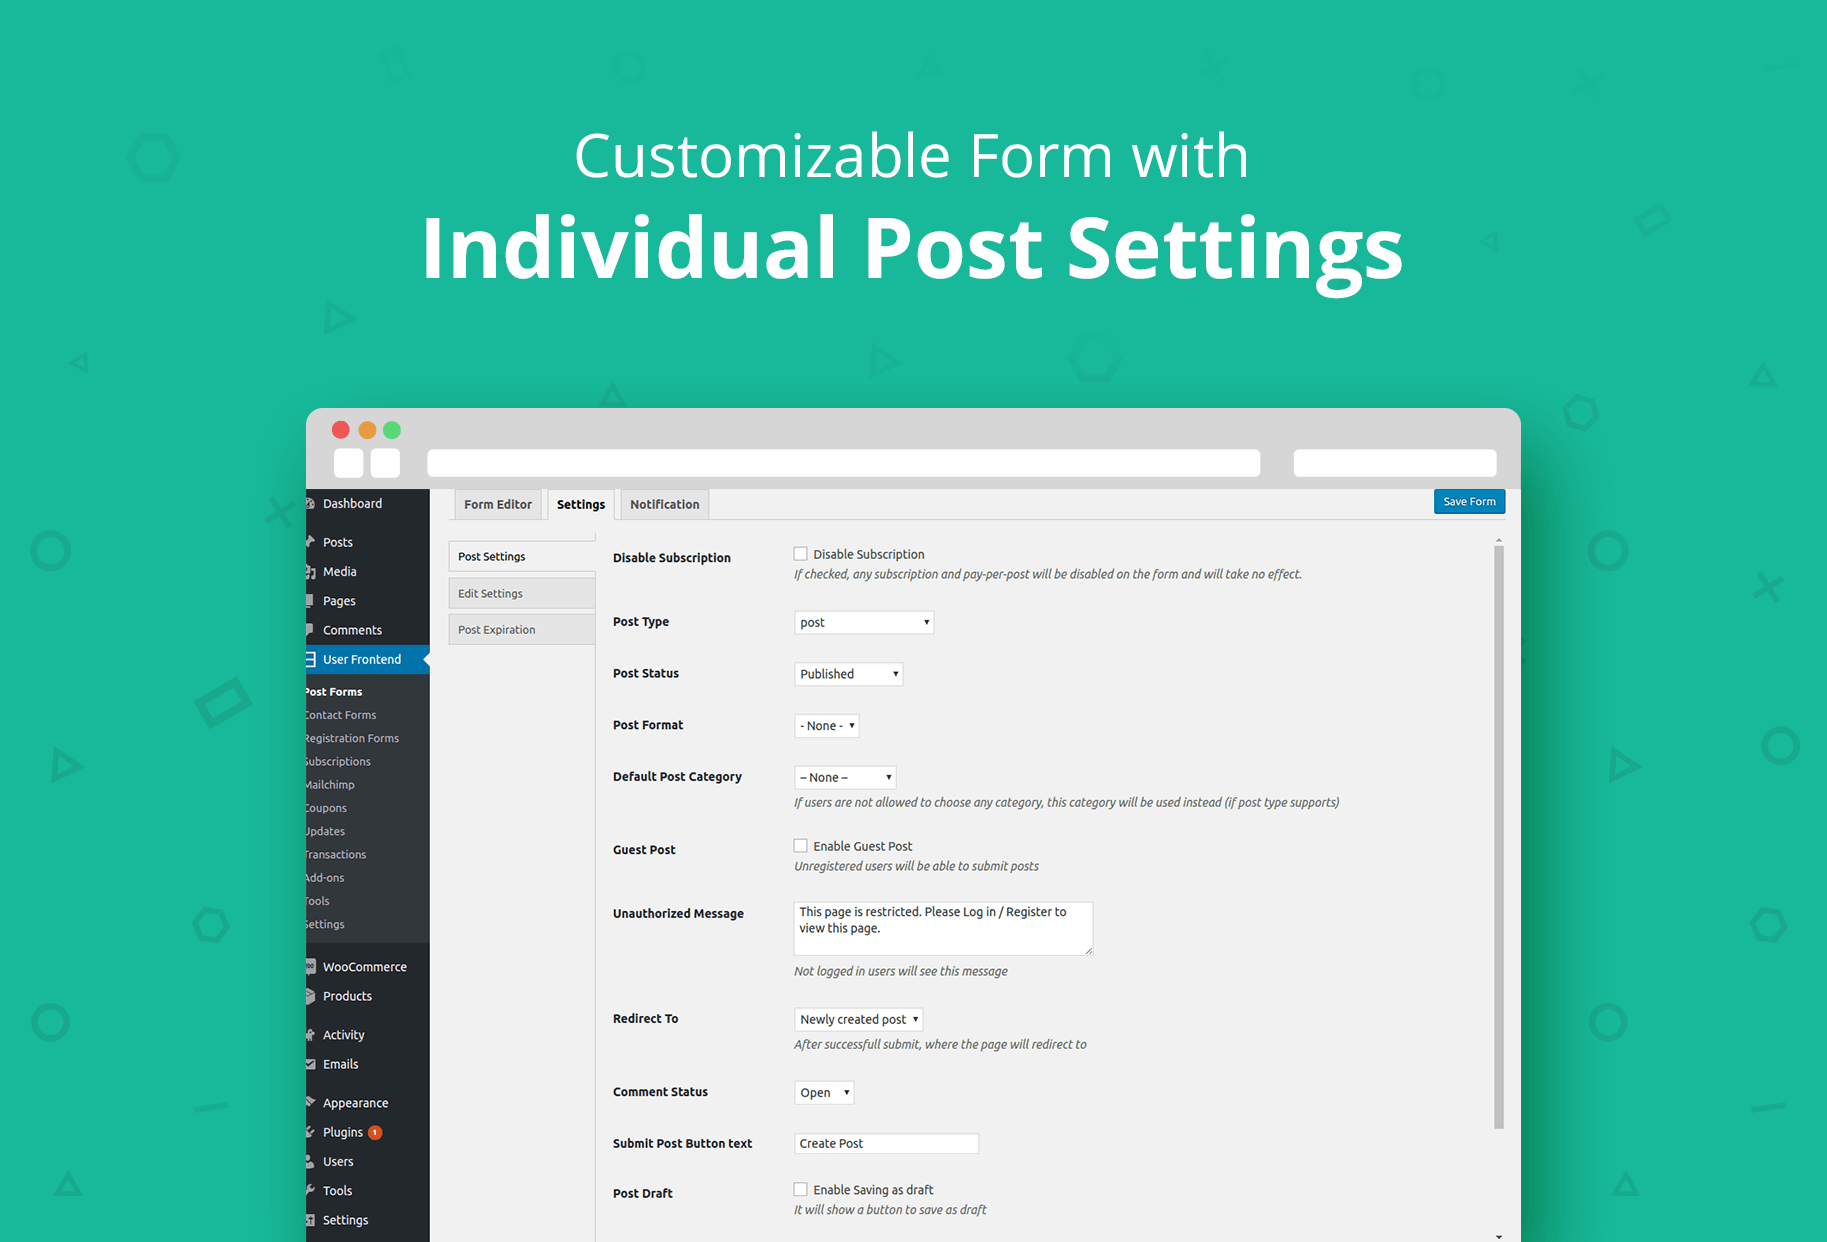 Get Detailed List of your Forms